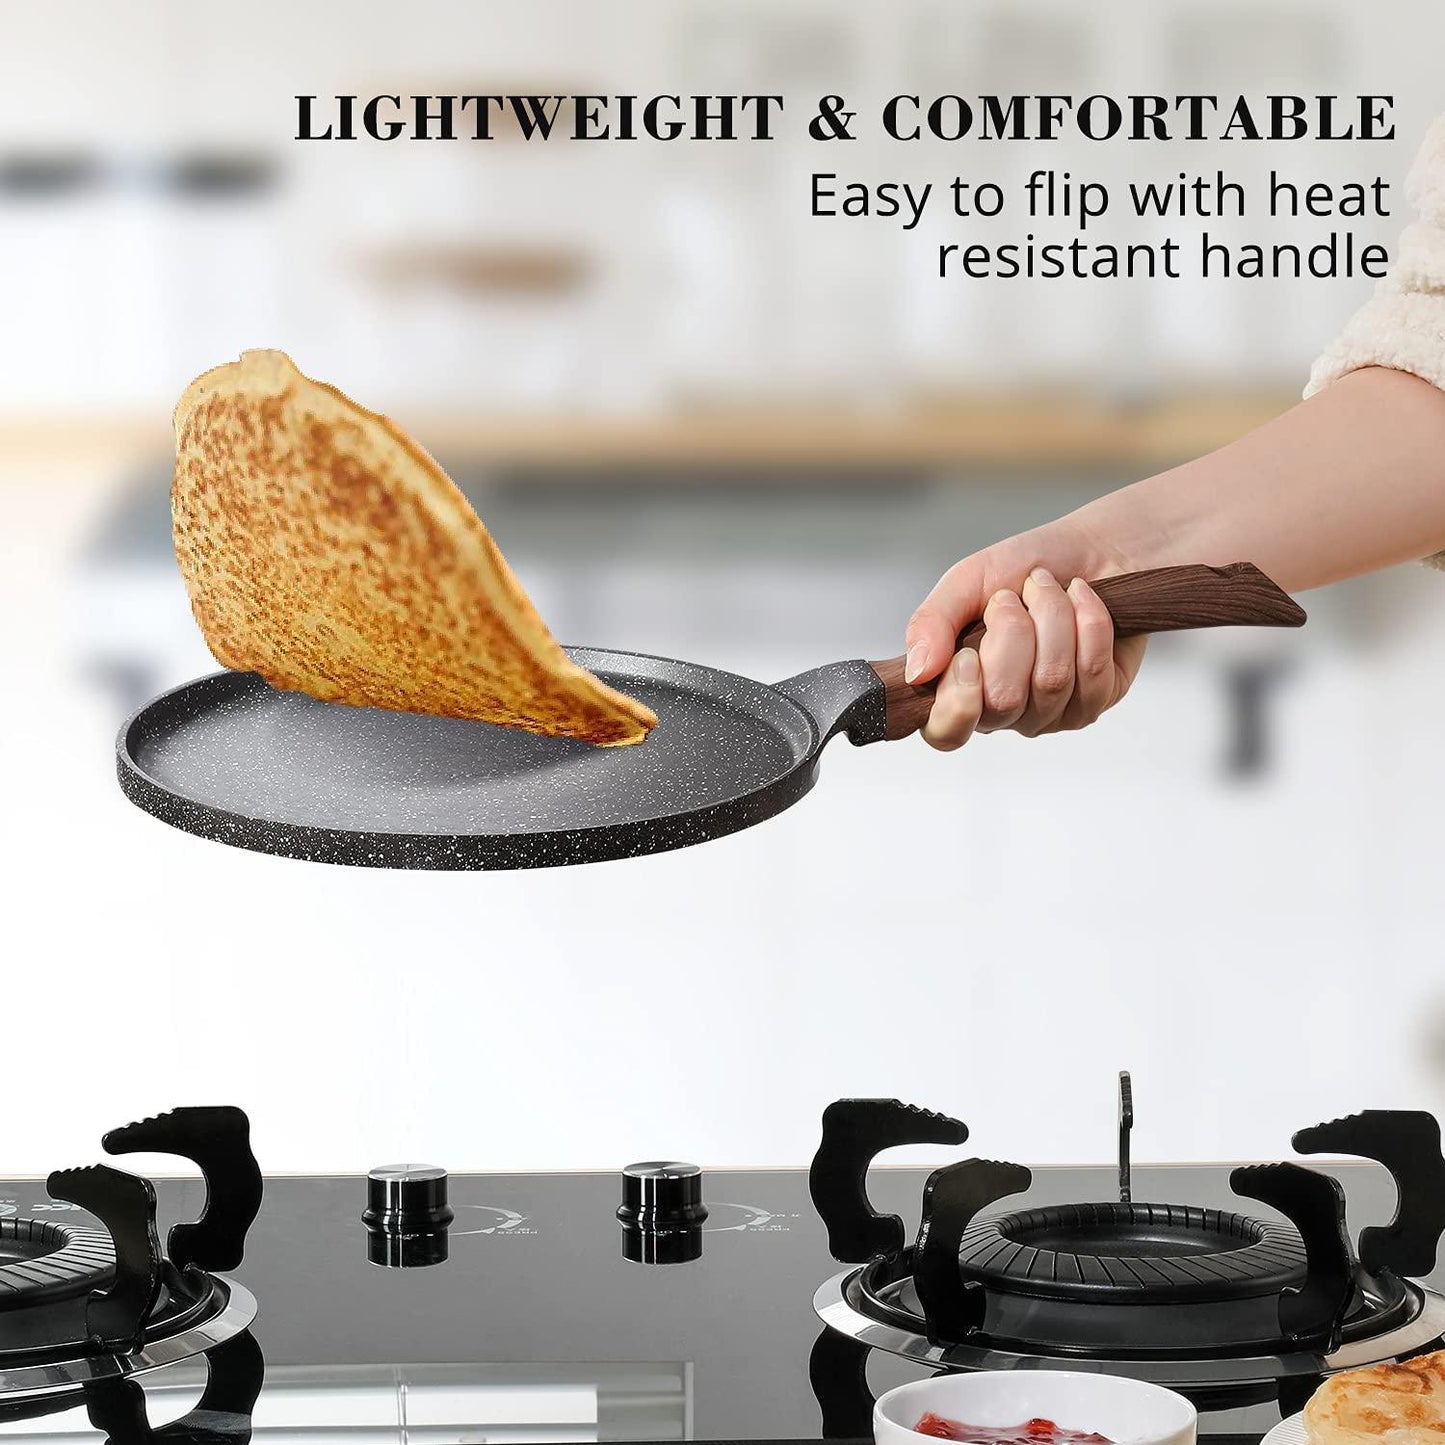 SENSARTE Nonstick Crepe Pan, Swiss Granite Coating Dosa Pan Pancake Flat Skillet Tawa Griddle 12-Inch with Stay-Cool Handle, Induction Compatible, PFOA Free - CookCave